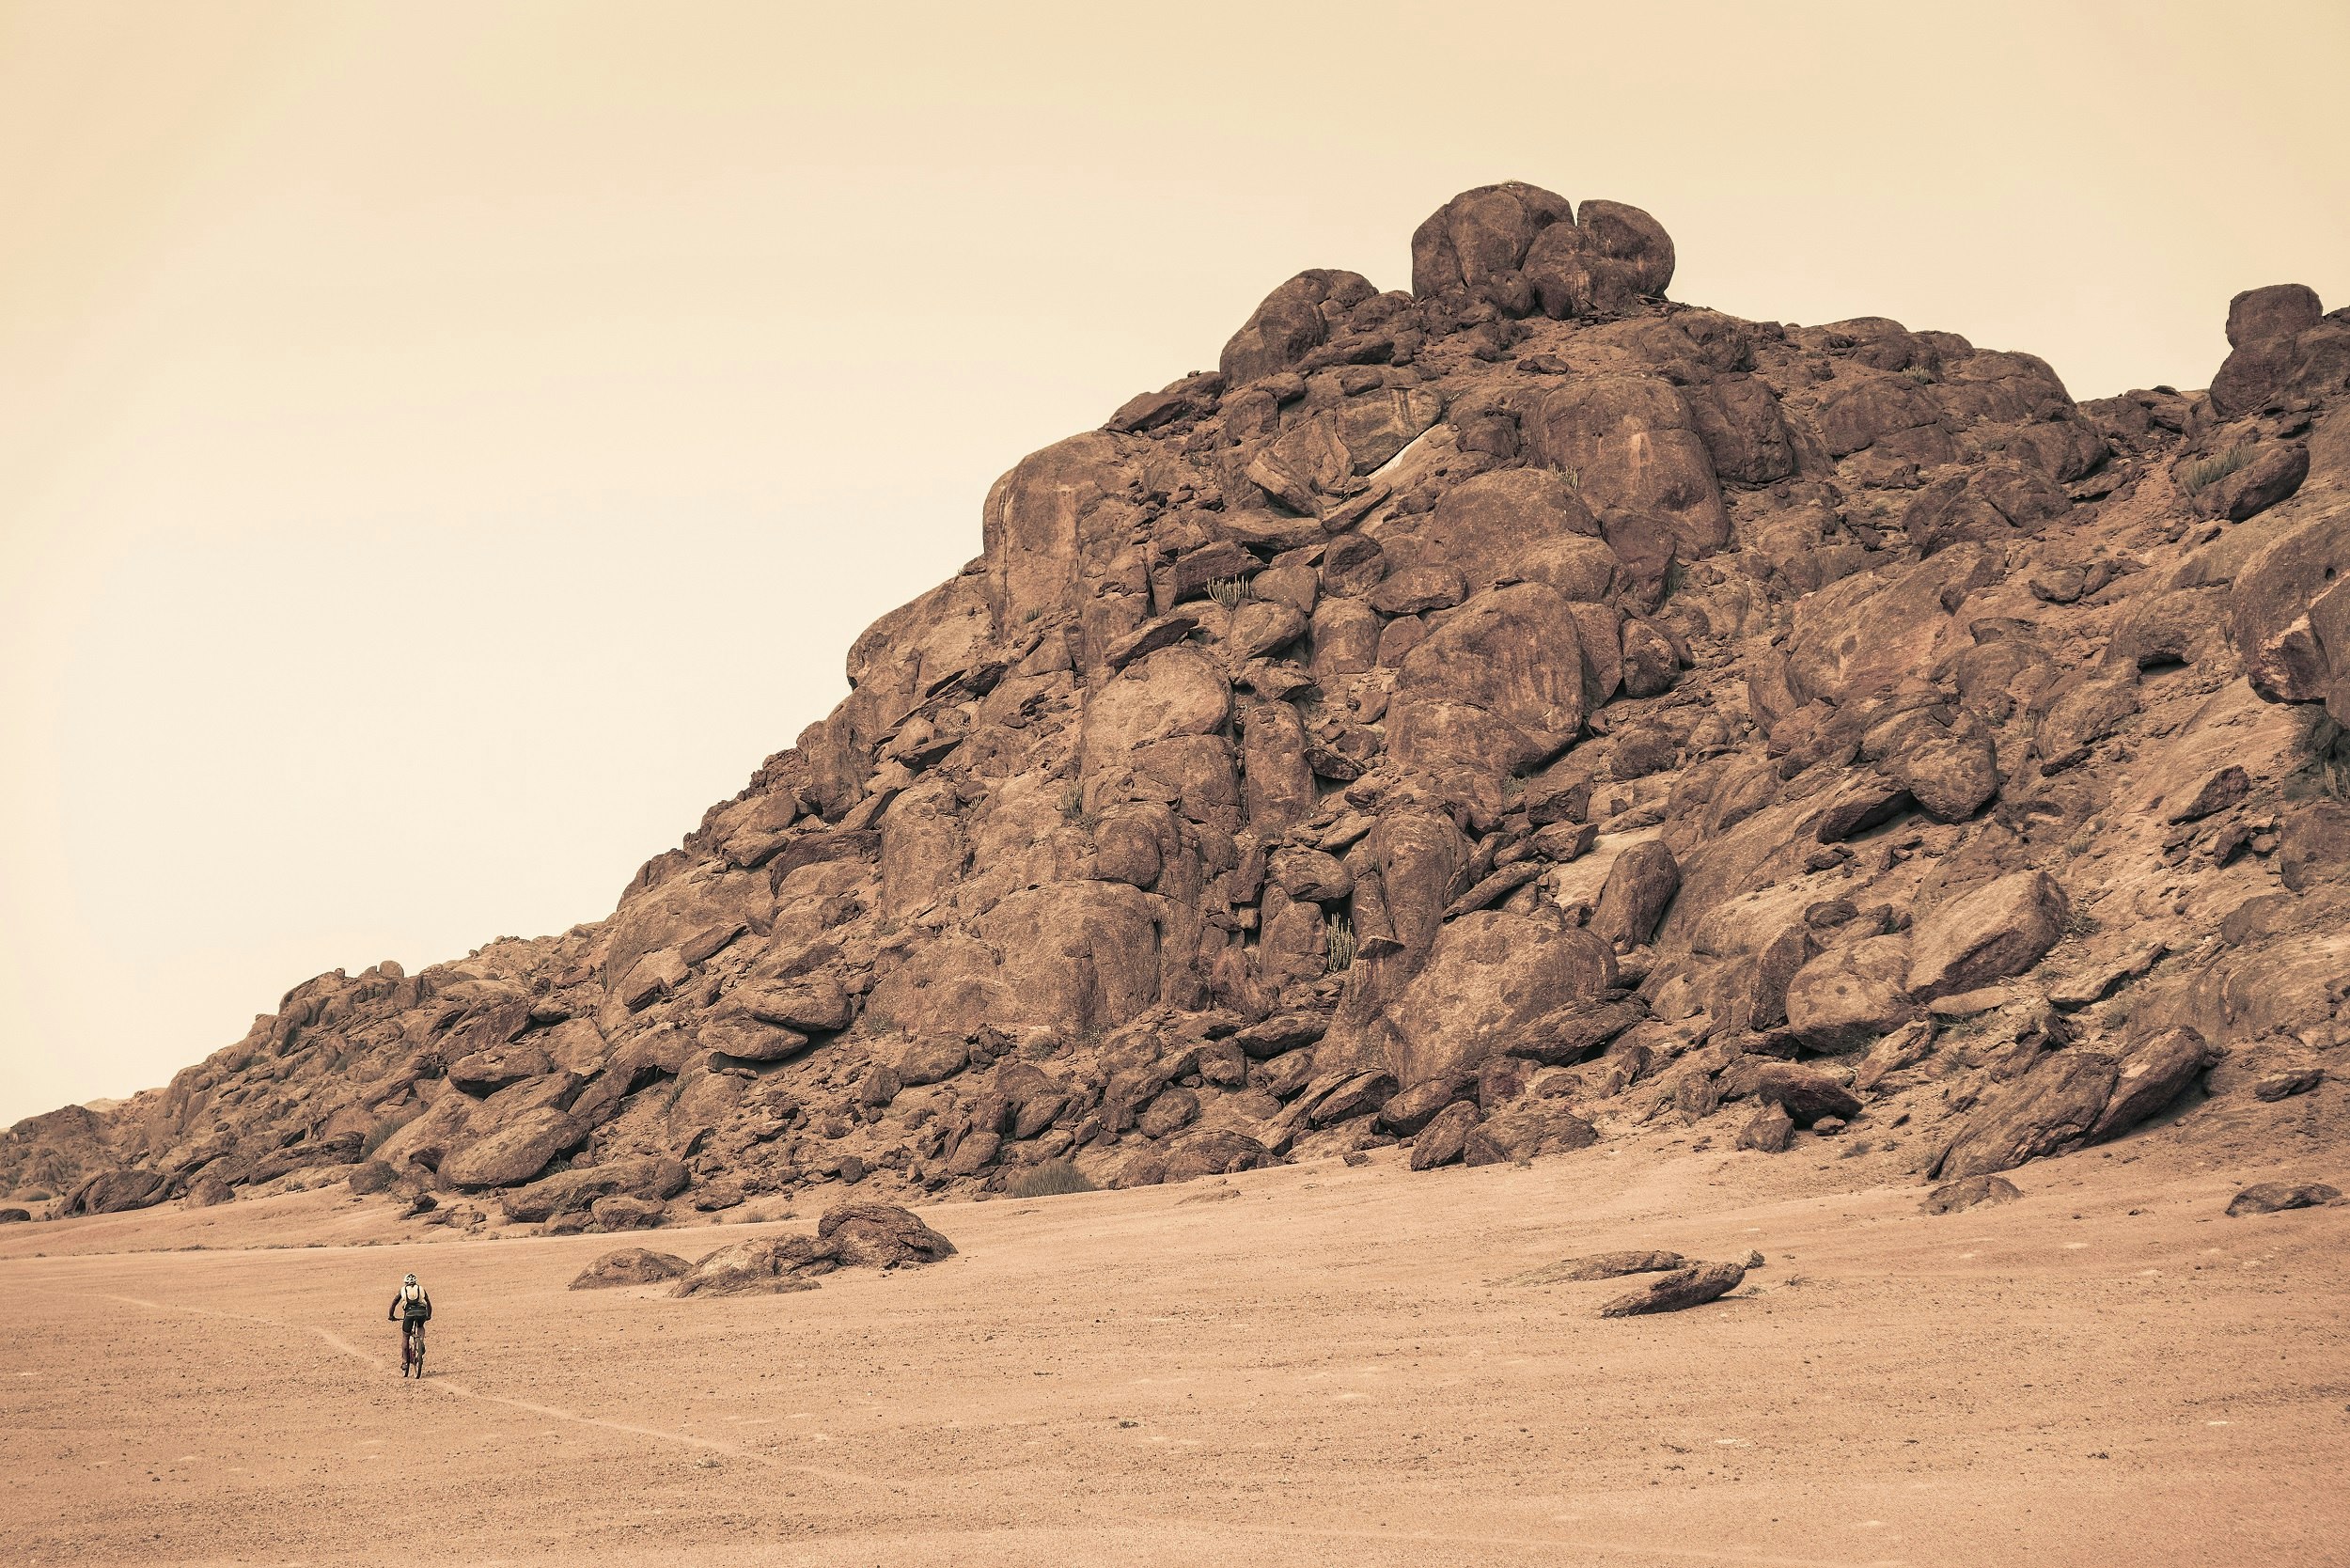 A lone mountain biker rides across a desert landscape past a large rock outcrop that towers above; everything is hued in brown tones. 	